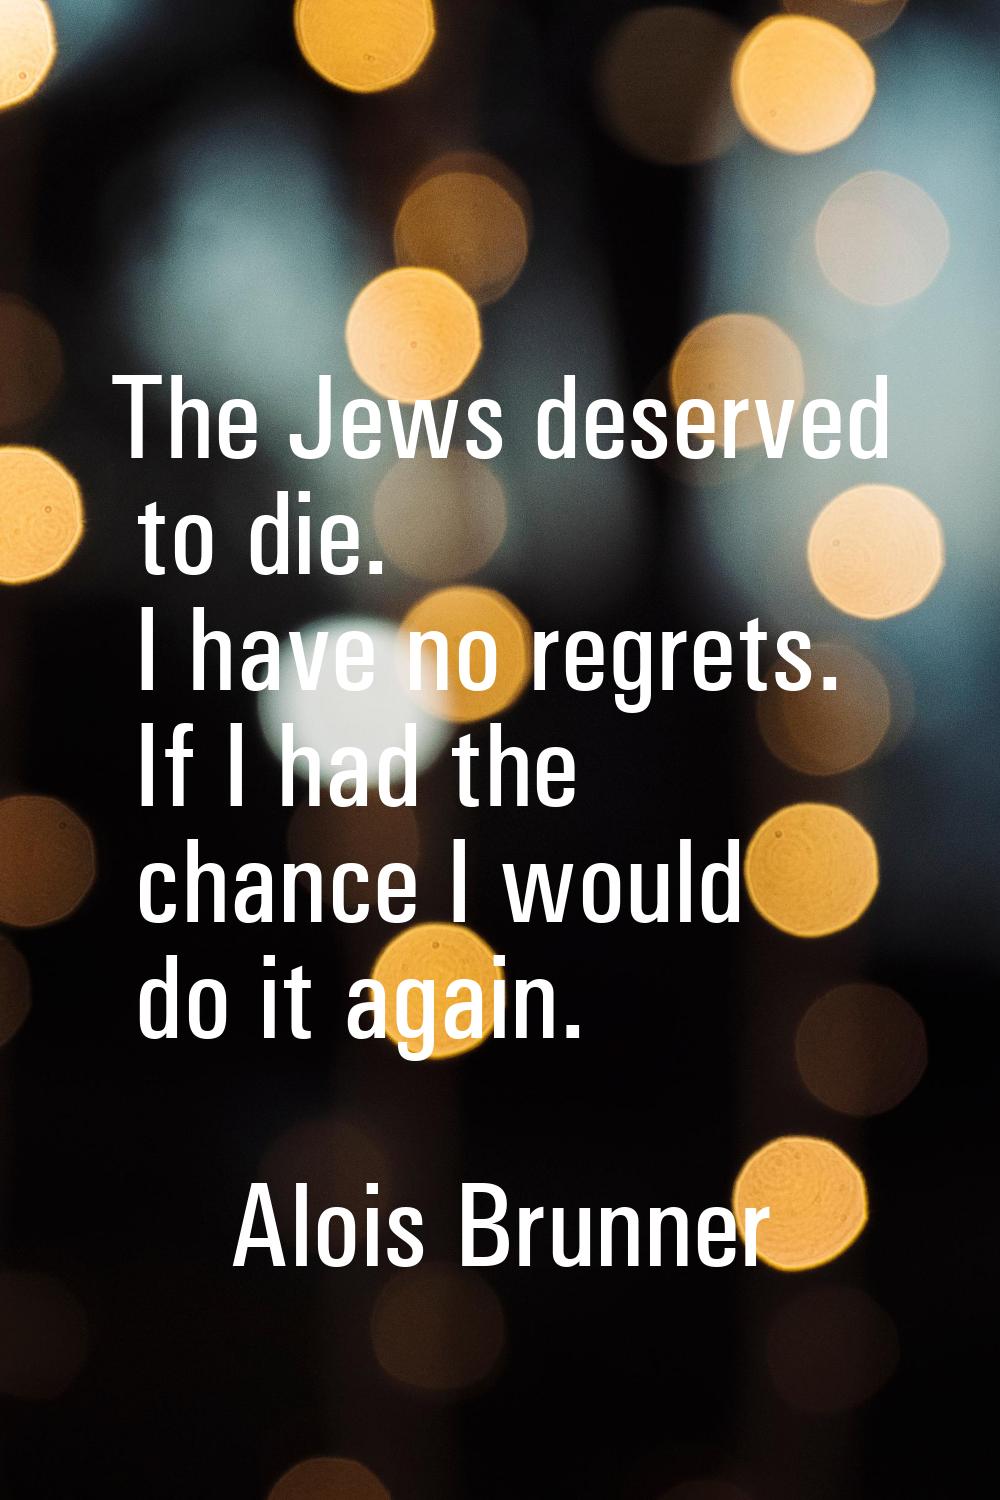 The Jews deserved to die. I have no regrets. If I had the chance I would do it again.